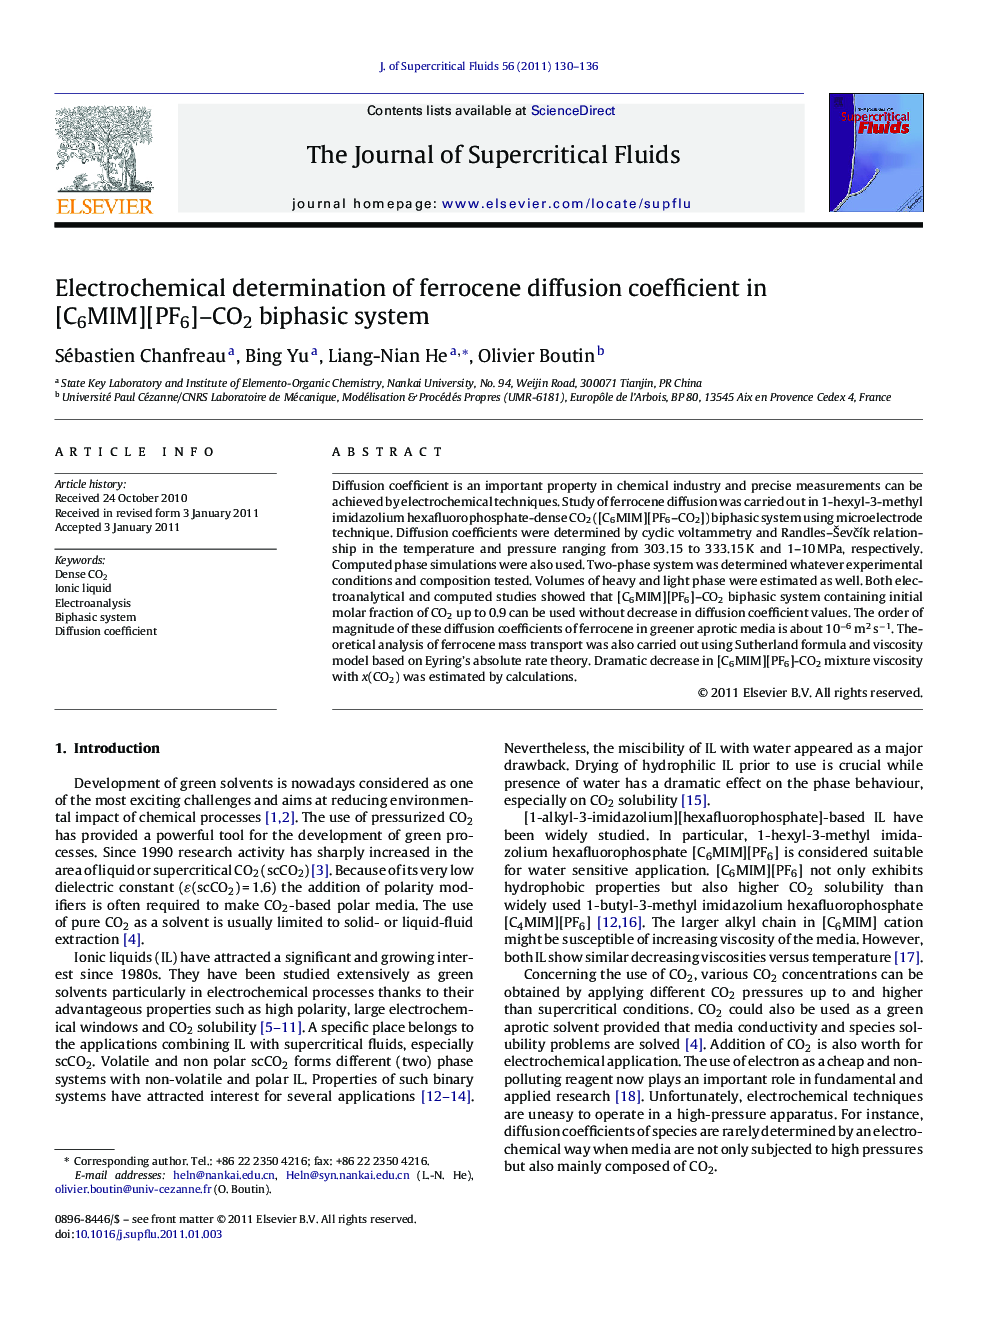 Electrochemical determination of ferrocene diffusion coefficient in [C6MIM][PF6]-CO2 biphasic system